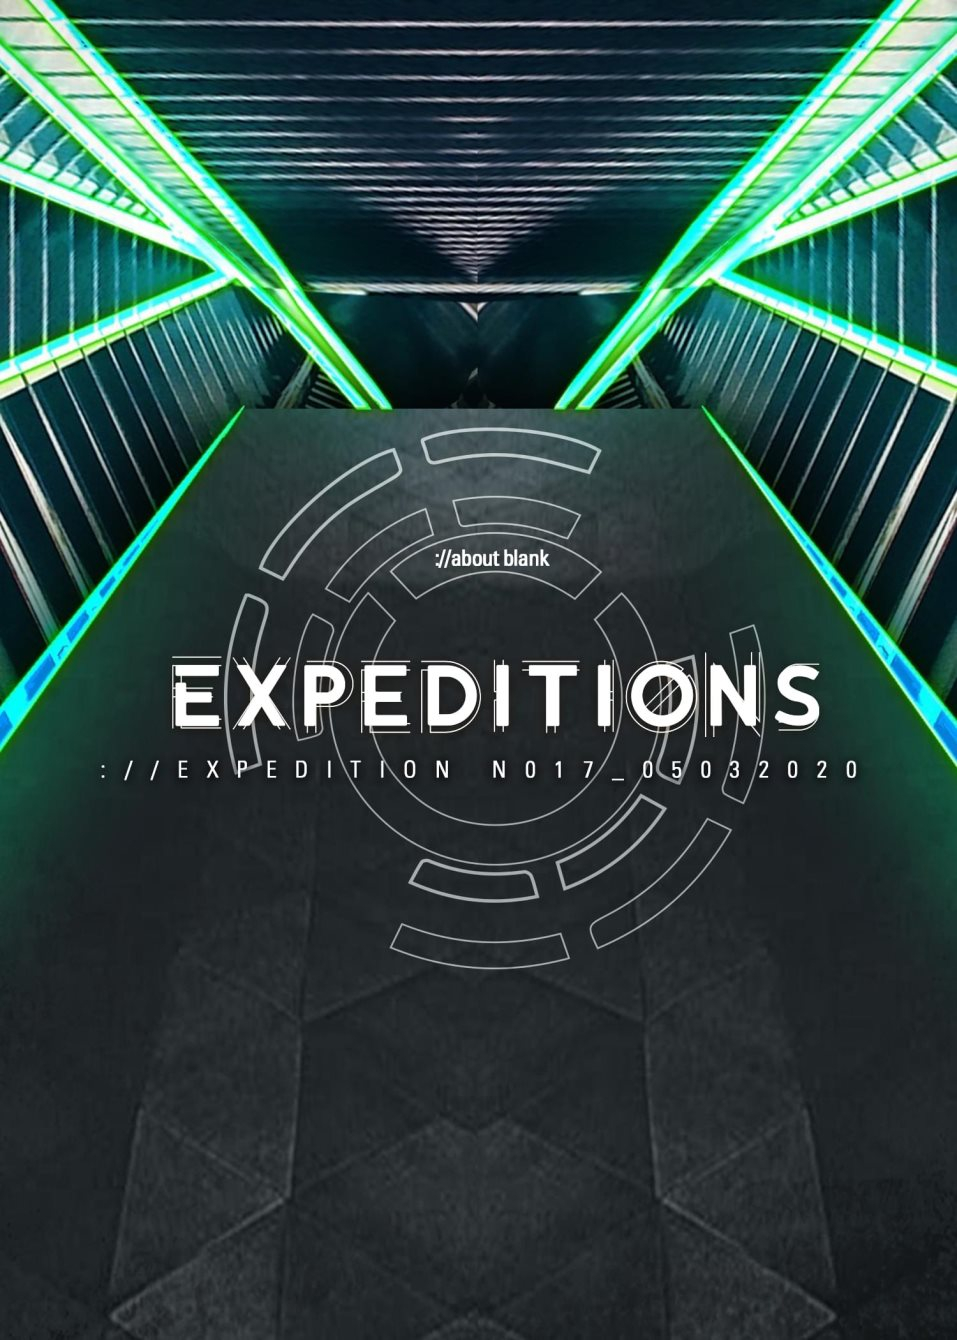 Expeditions N017 - Flyer front